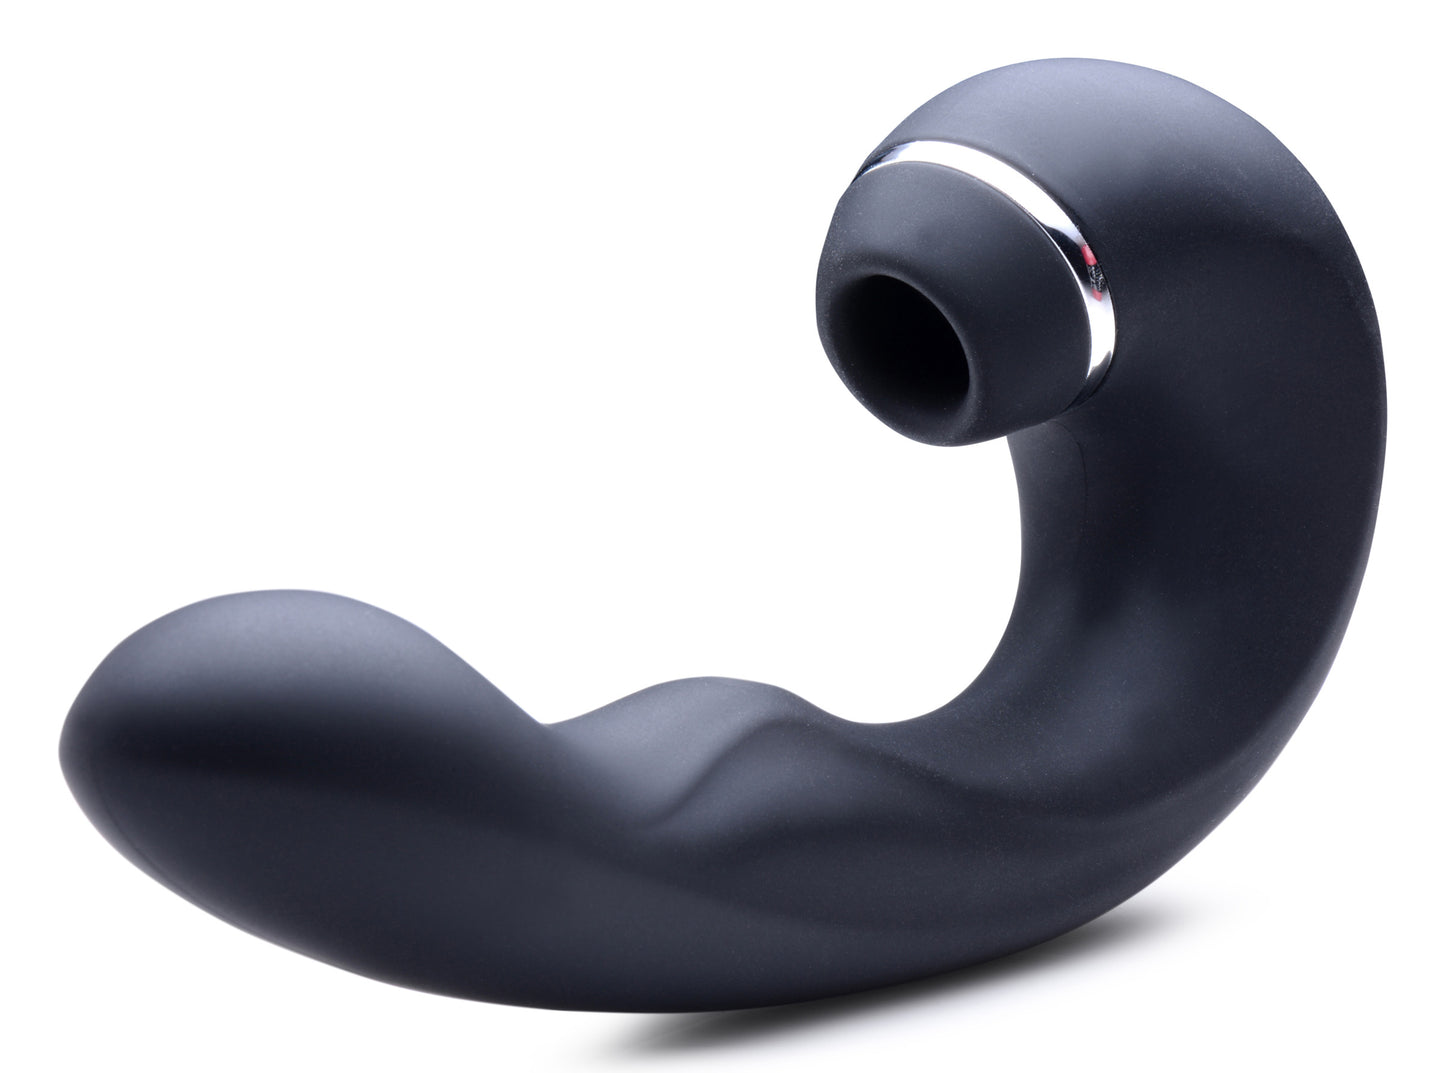 Shegasm 5 Star 10X Tapping G-Spot Silicone Vibrator with Suction - Black - UABDSM